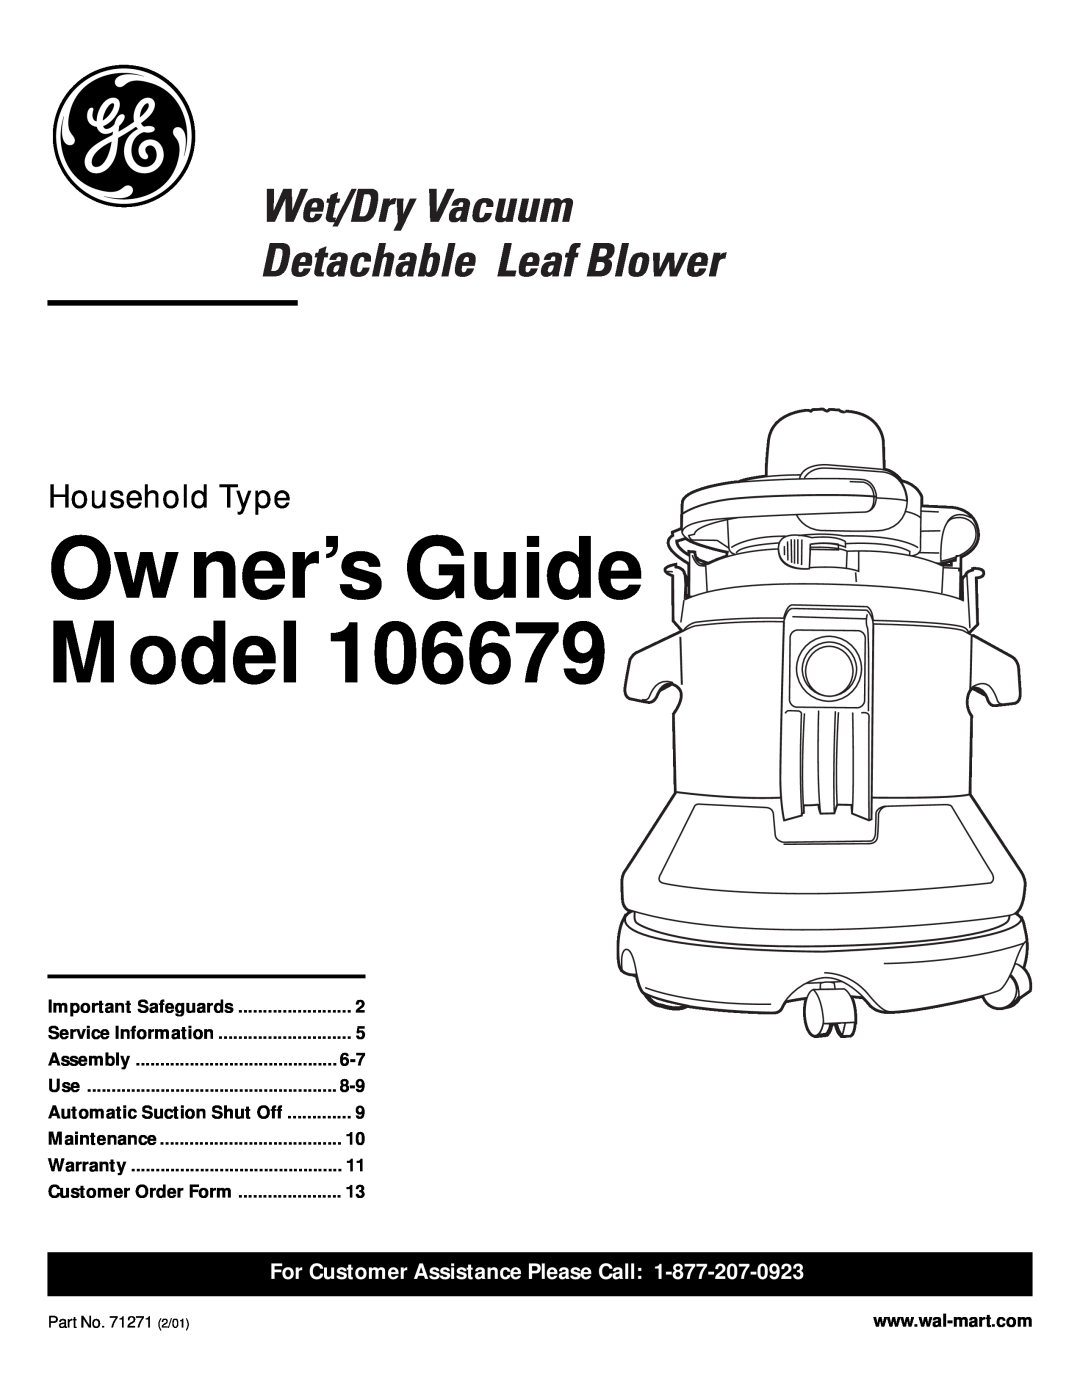 GE 106679 warranty Household Type, For Customer Assistance Please Call, Owner’s Guide Model, Part No. 71271 2/01 